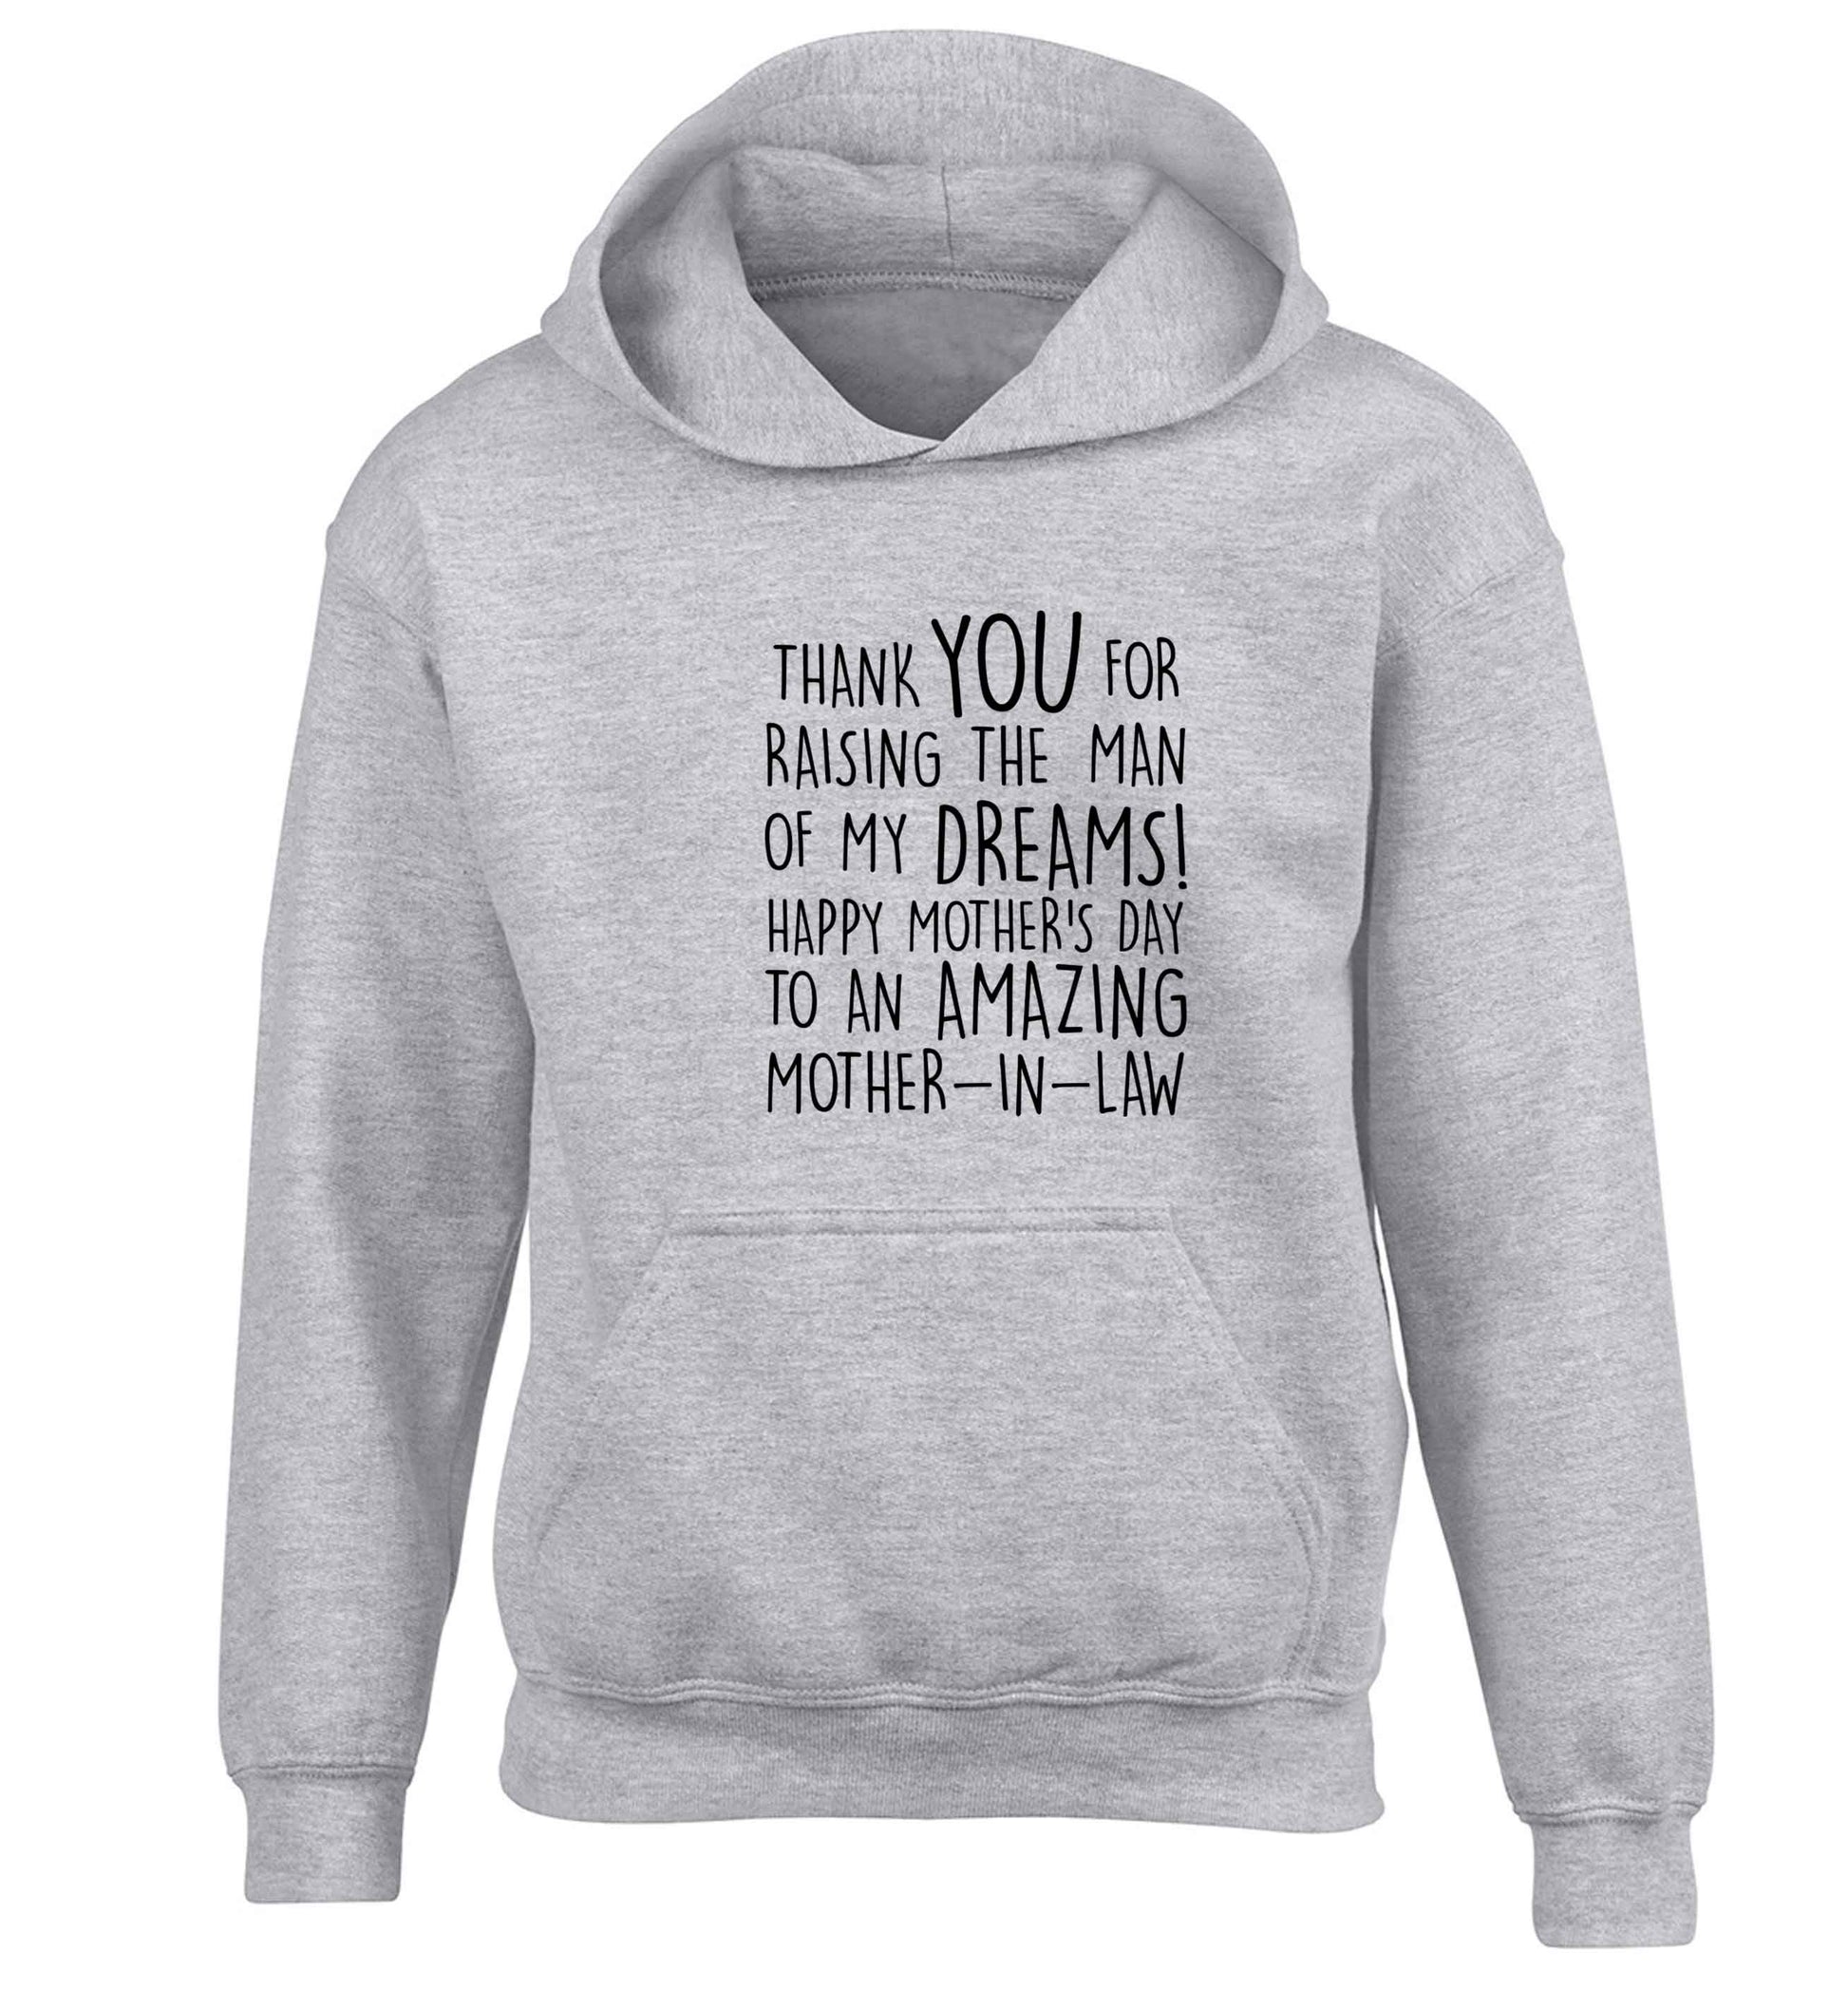 Raising the man of my dreams mother's day mother-in-law children's grey hoodie 12-13 Years